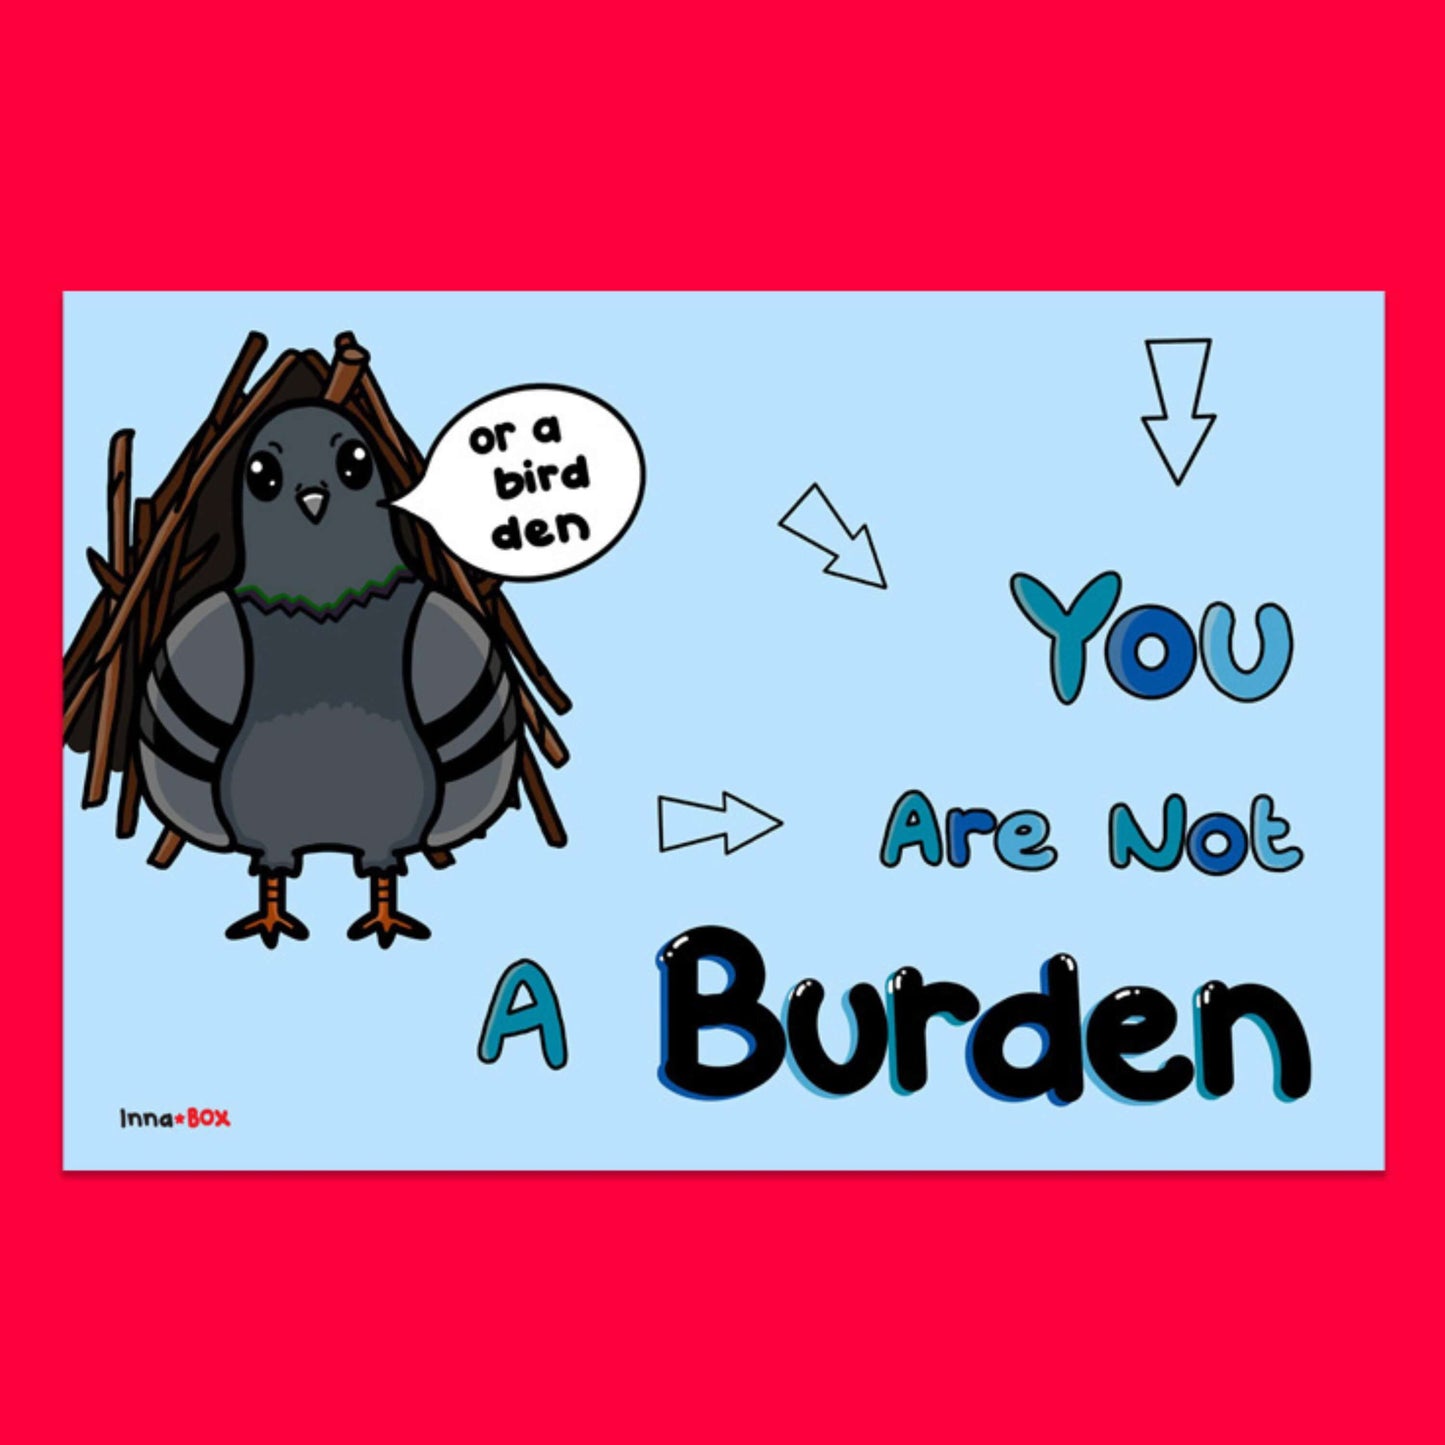 You are not a burden postcard on a red background. The blue postcard has an illustration of a pigeon with a nest behind it and a speech bubble from its mouth that reads 'or a bird den'. Next to the pigeon is blue text that reads 'you are not a' and 'burden' in black text. There are arrows pointing to the text.